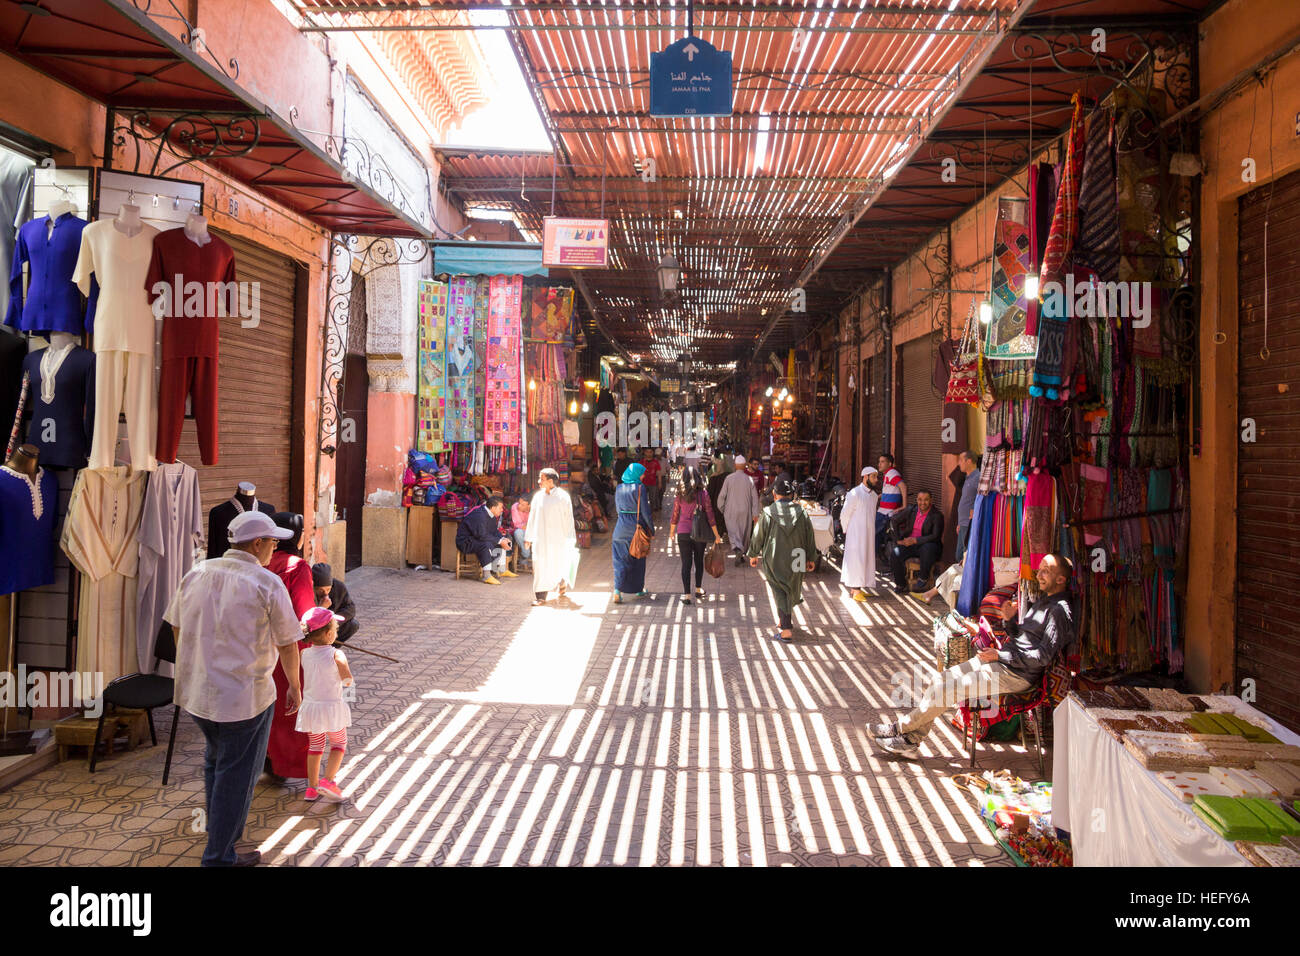 Tourists and locals walking through the souks in the old medina of Marrakesh, Morocco Stock Photo